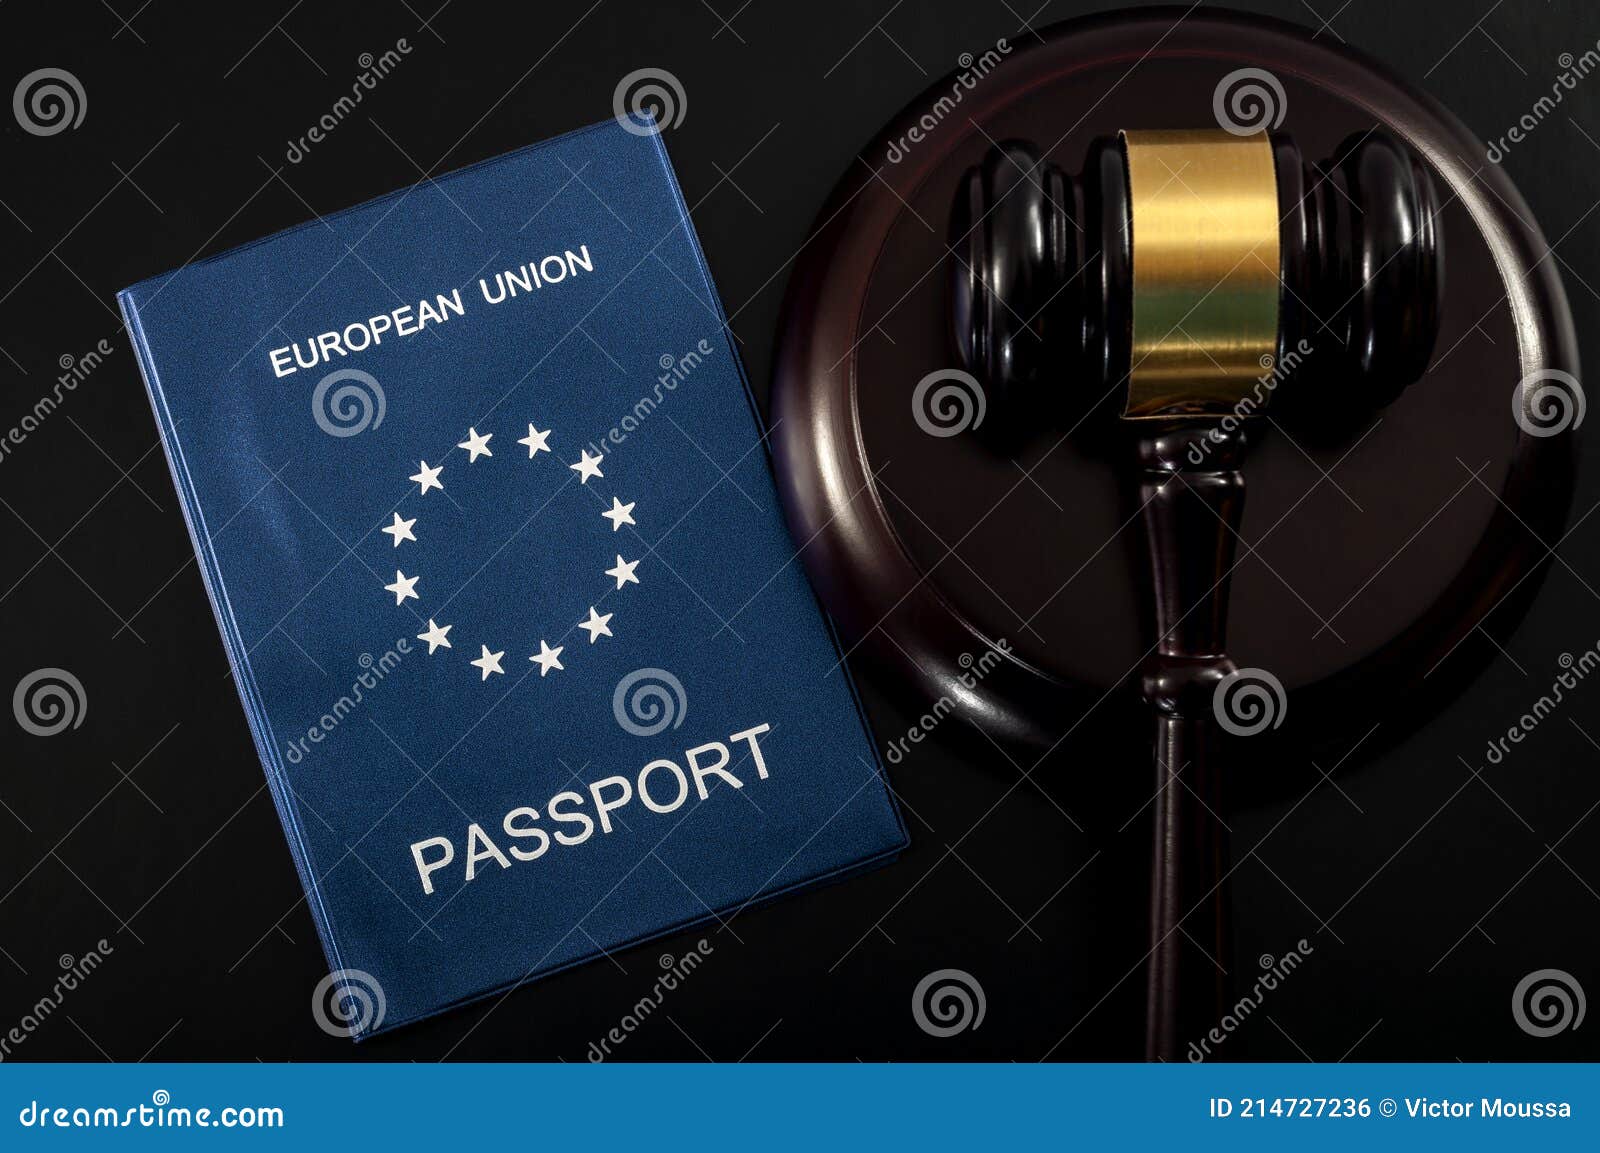 eu citizens rights and european freedom of movement concept with close up on an european passport next to a gavel on a dark